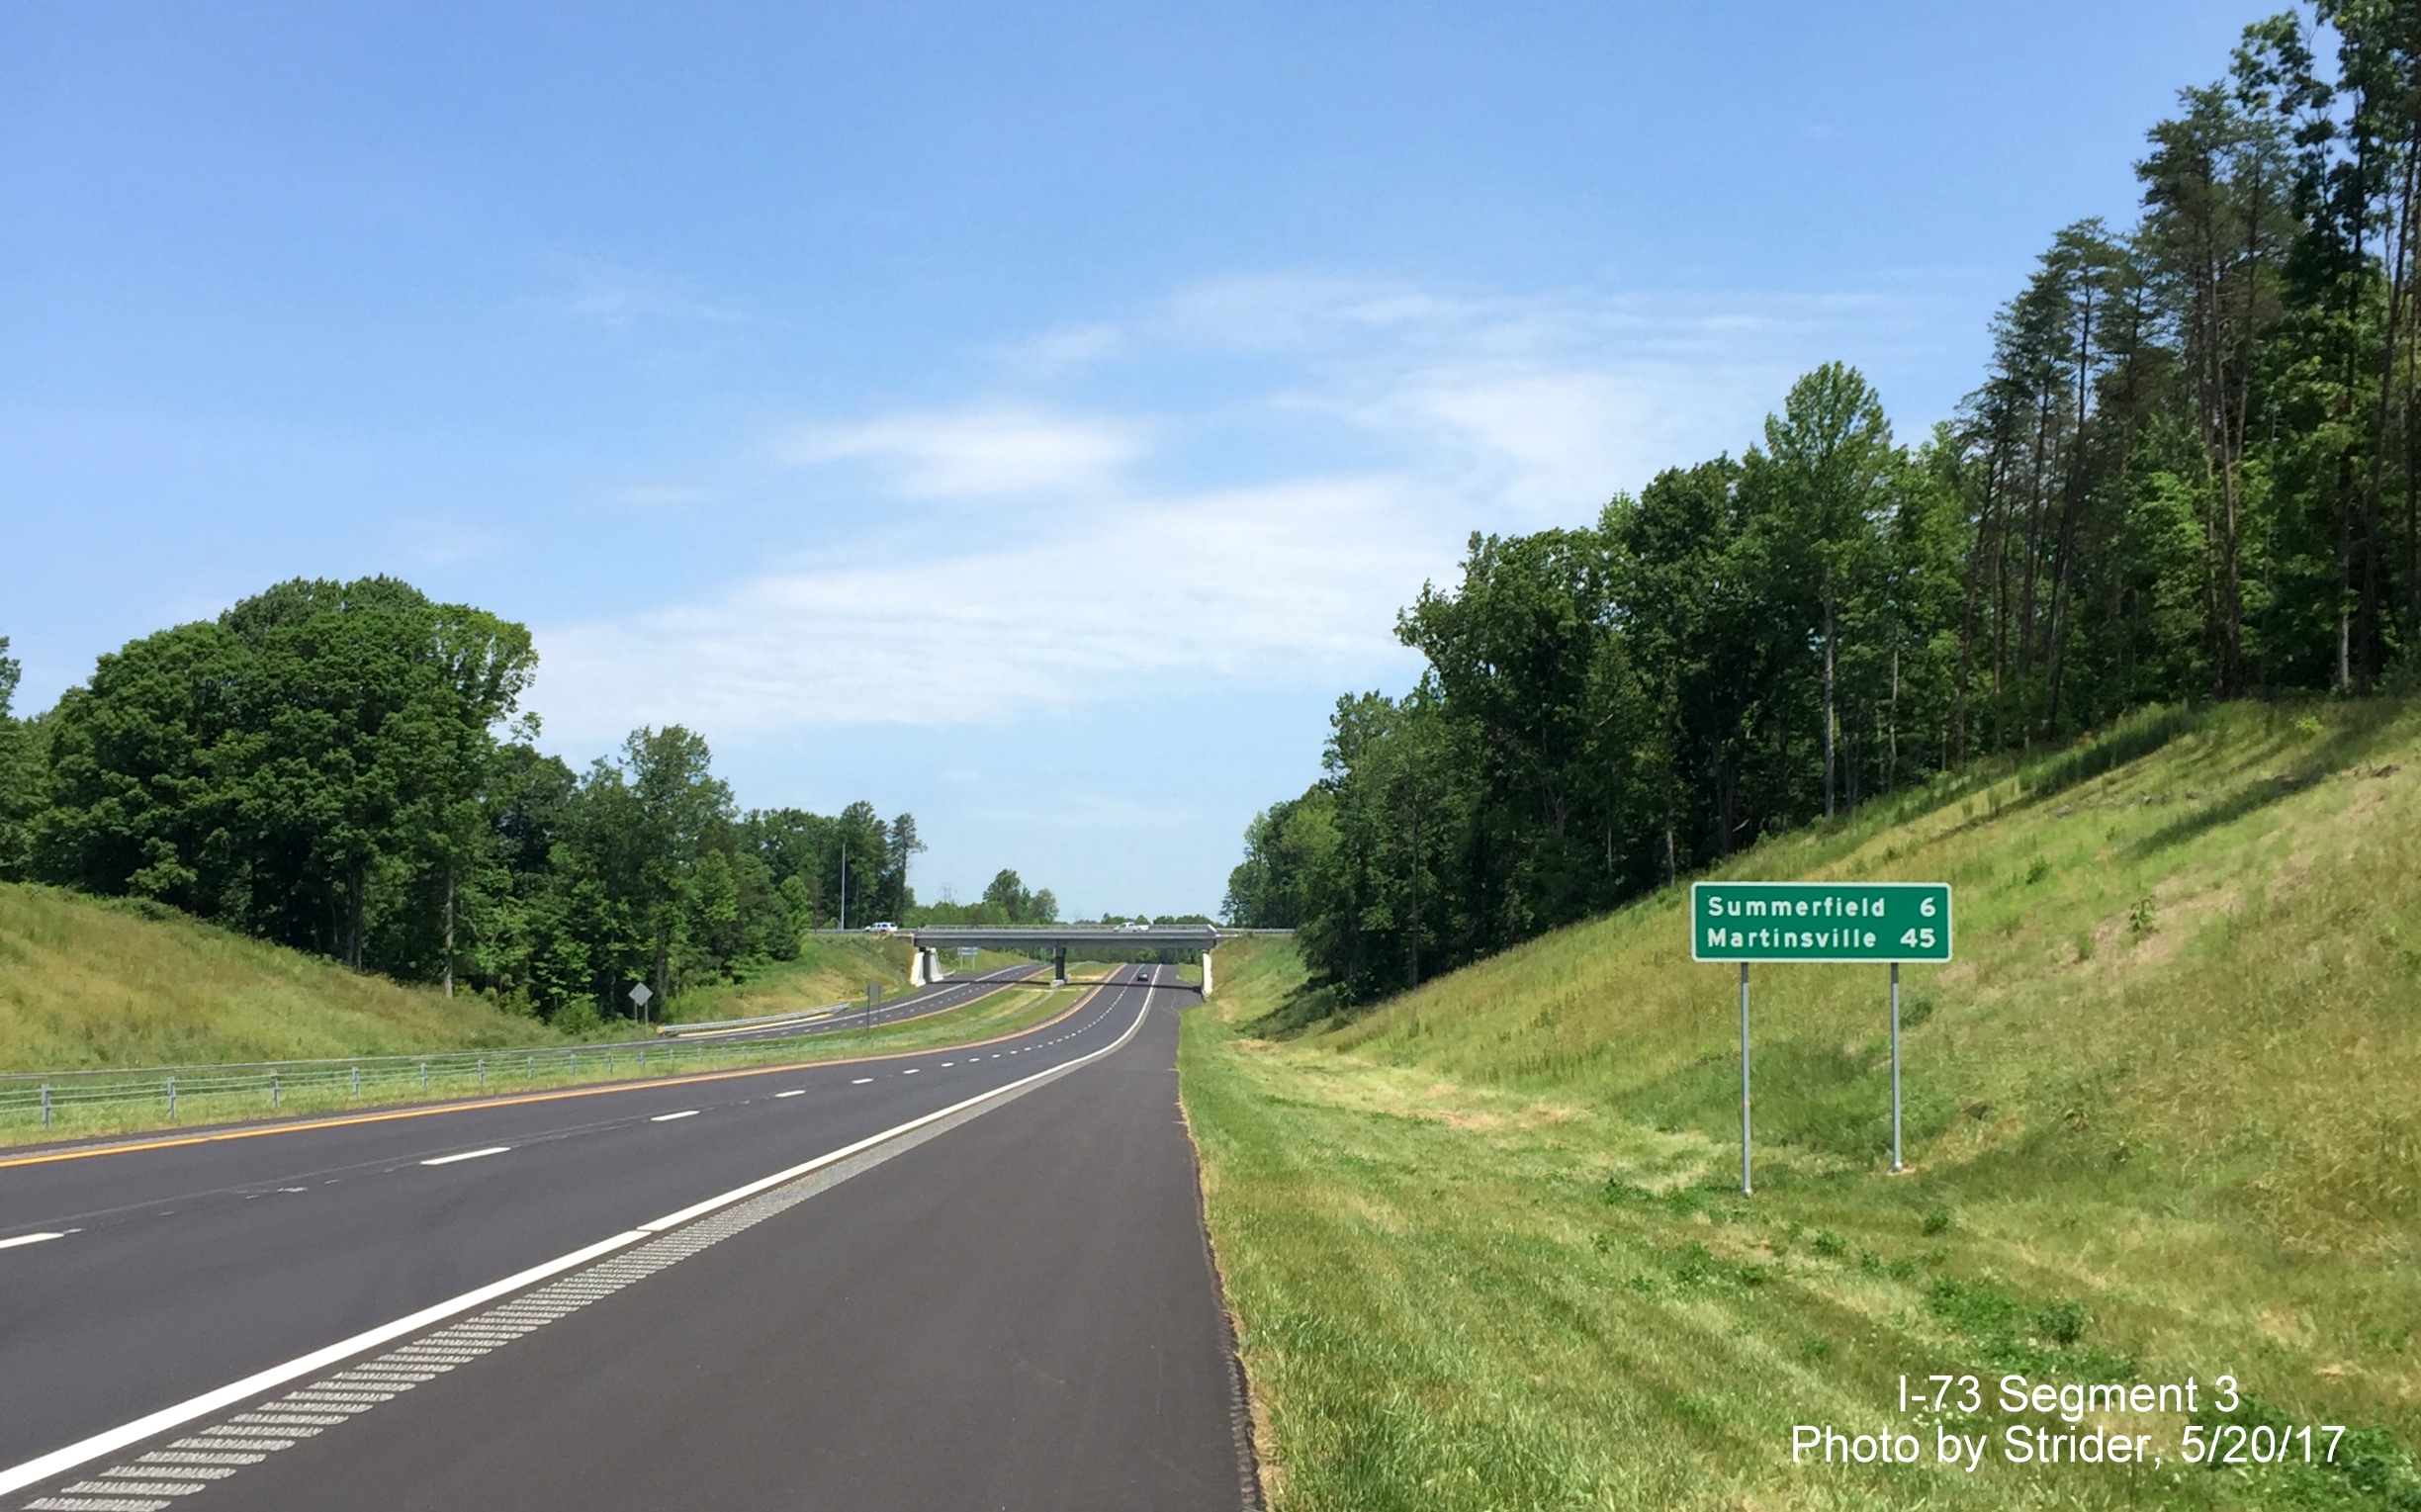 Image taken of first destination mileage sign on new section of I-73 North, by Strider